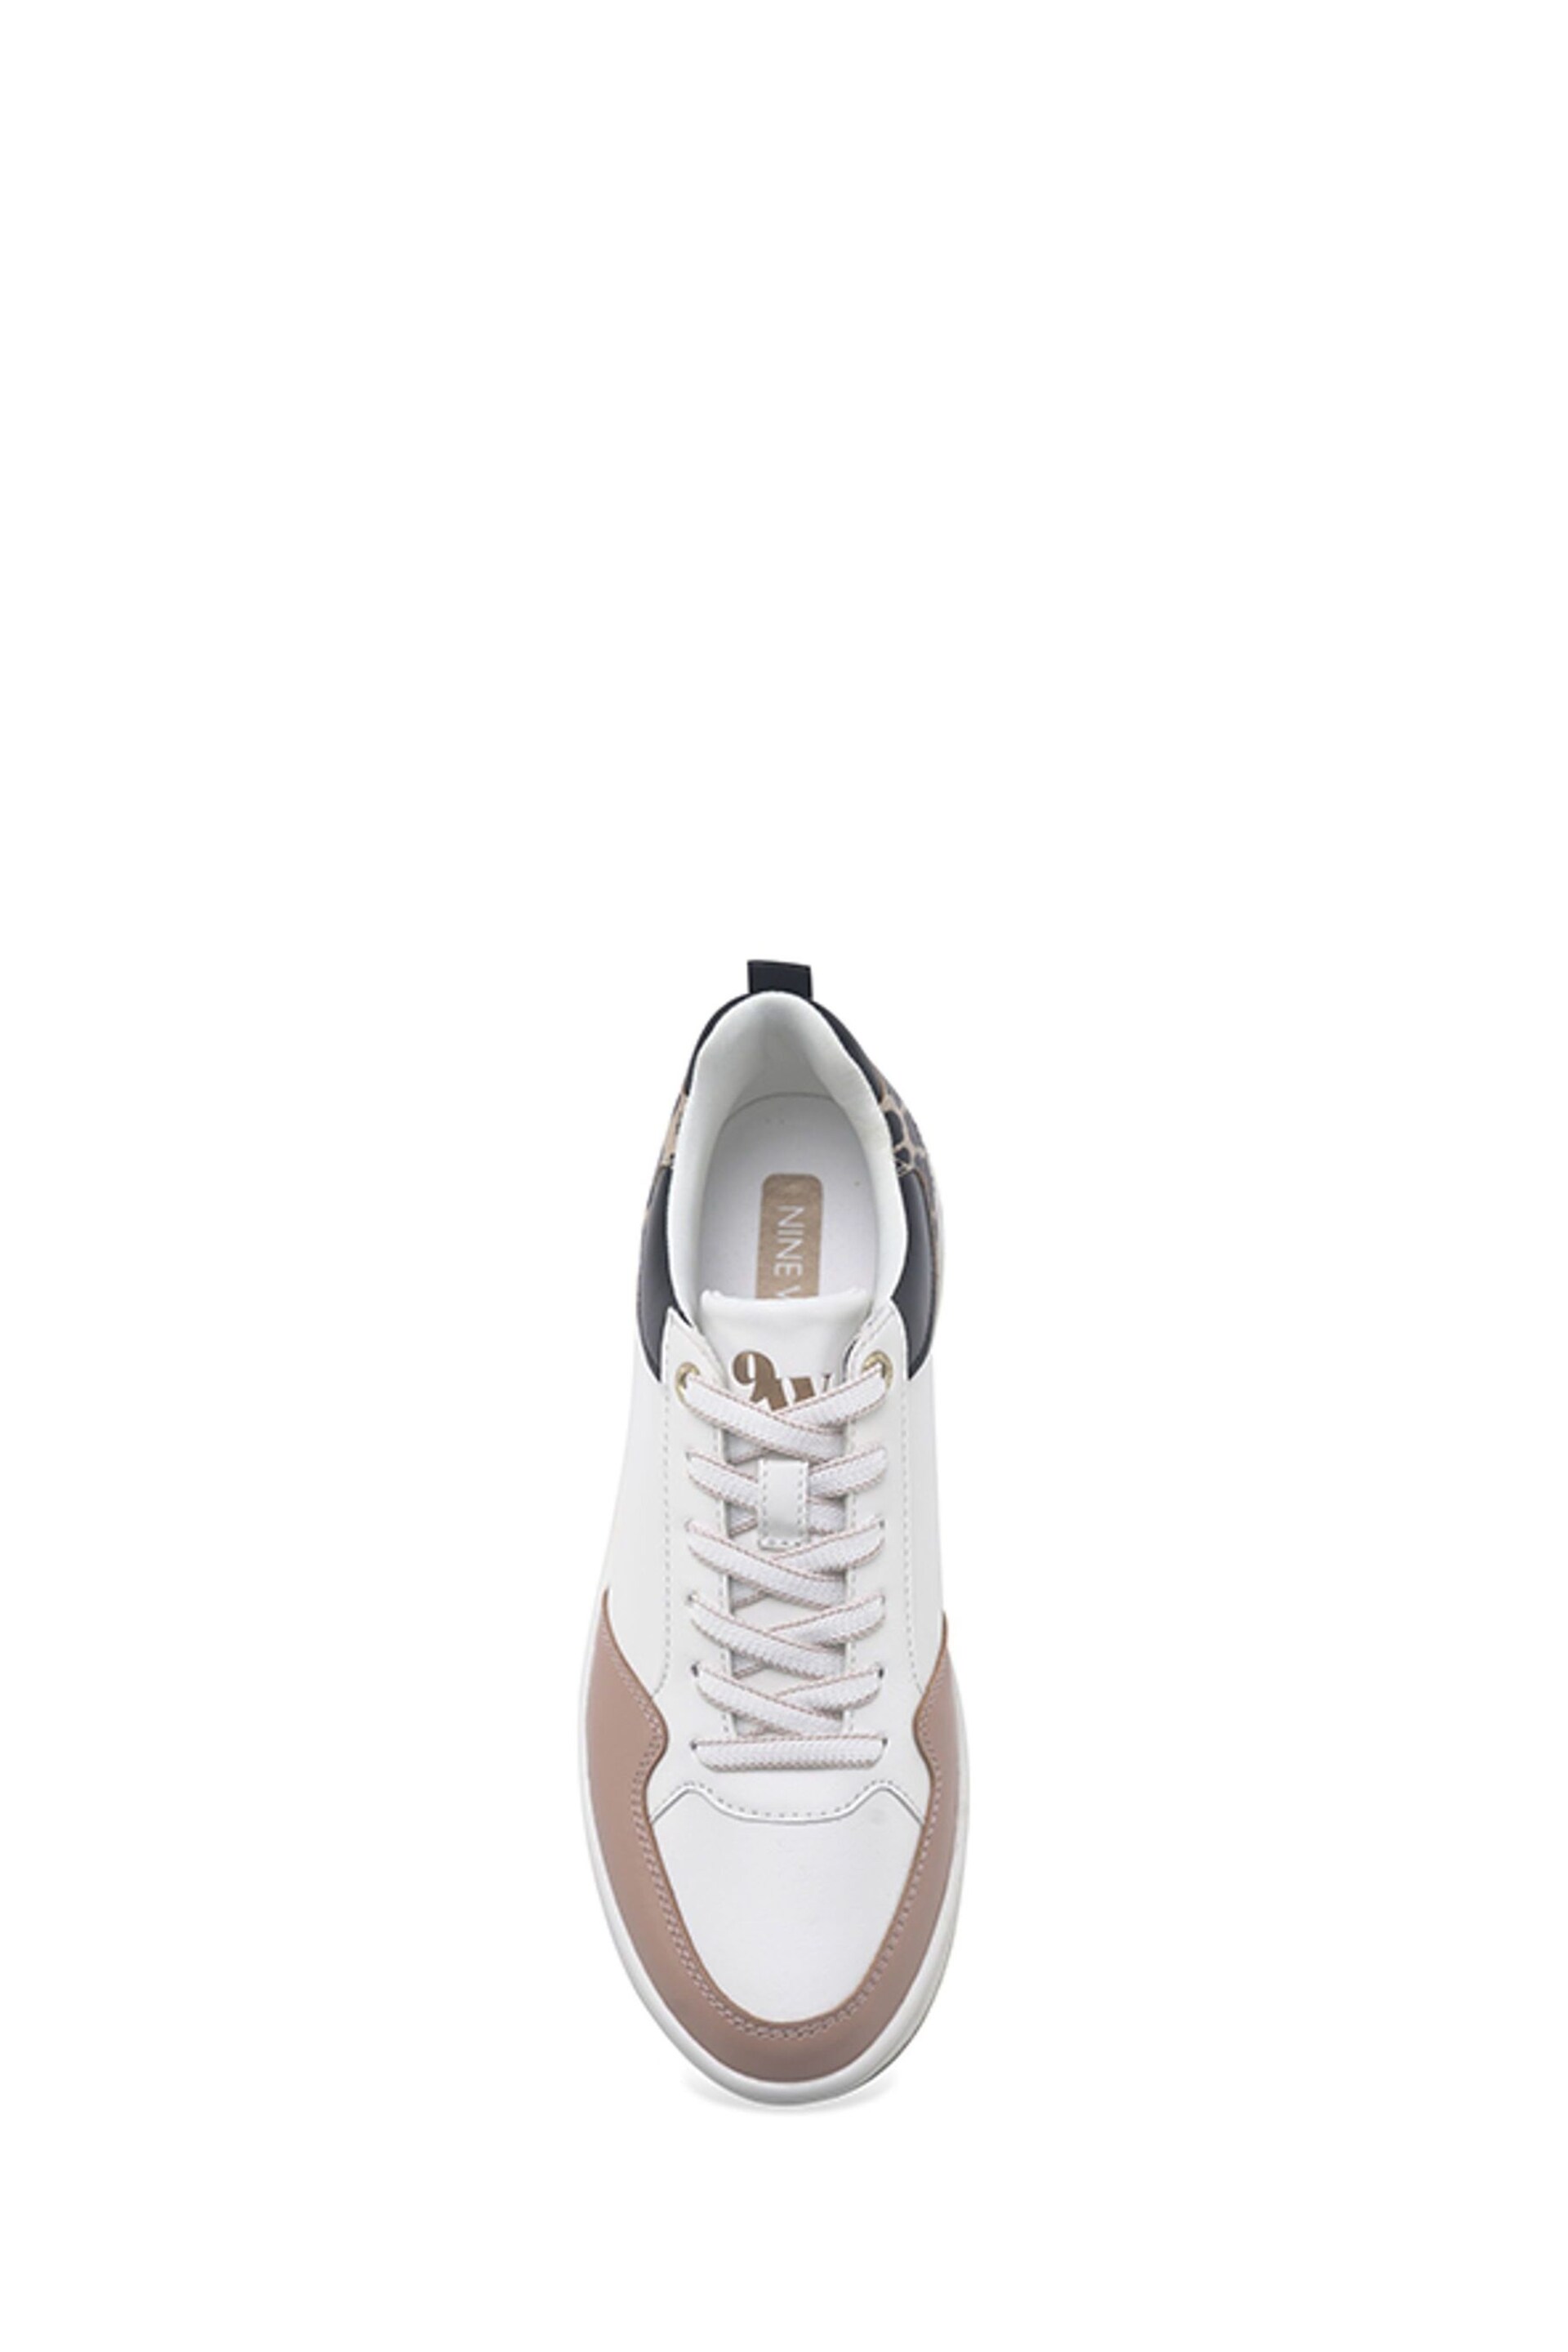 Nine West Womens 'Sileo' White Trainers with Leopard - Image 3 of 3